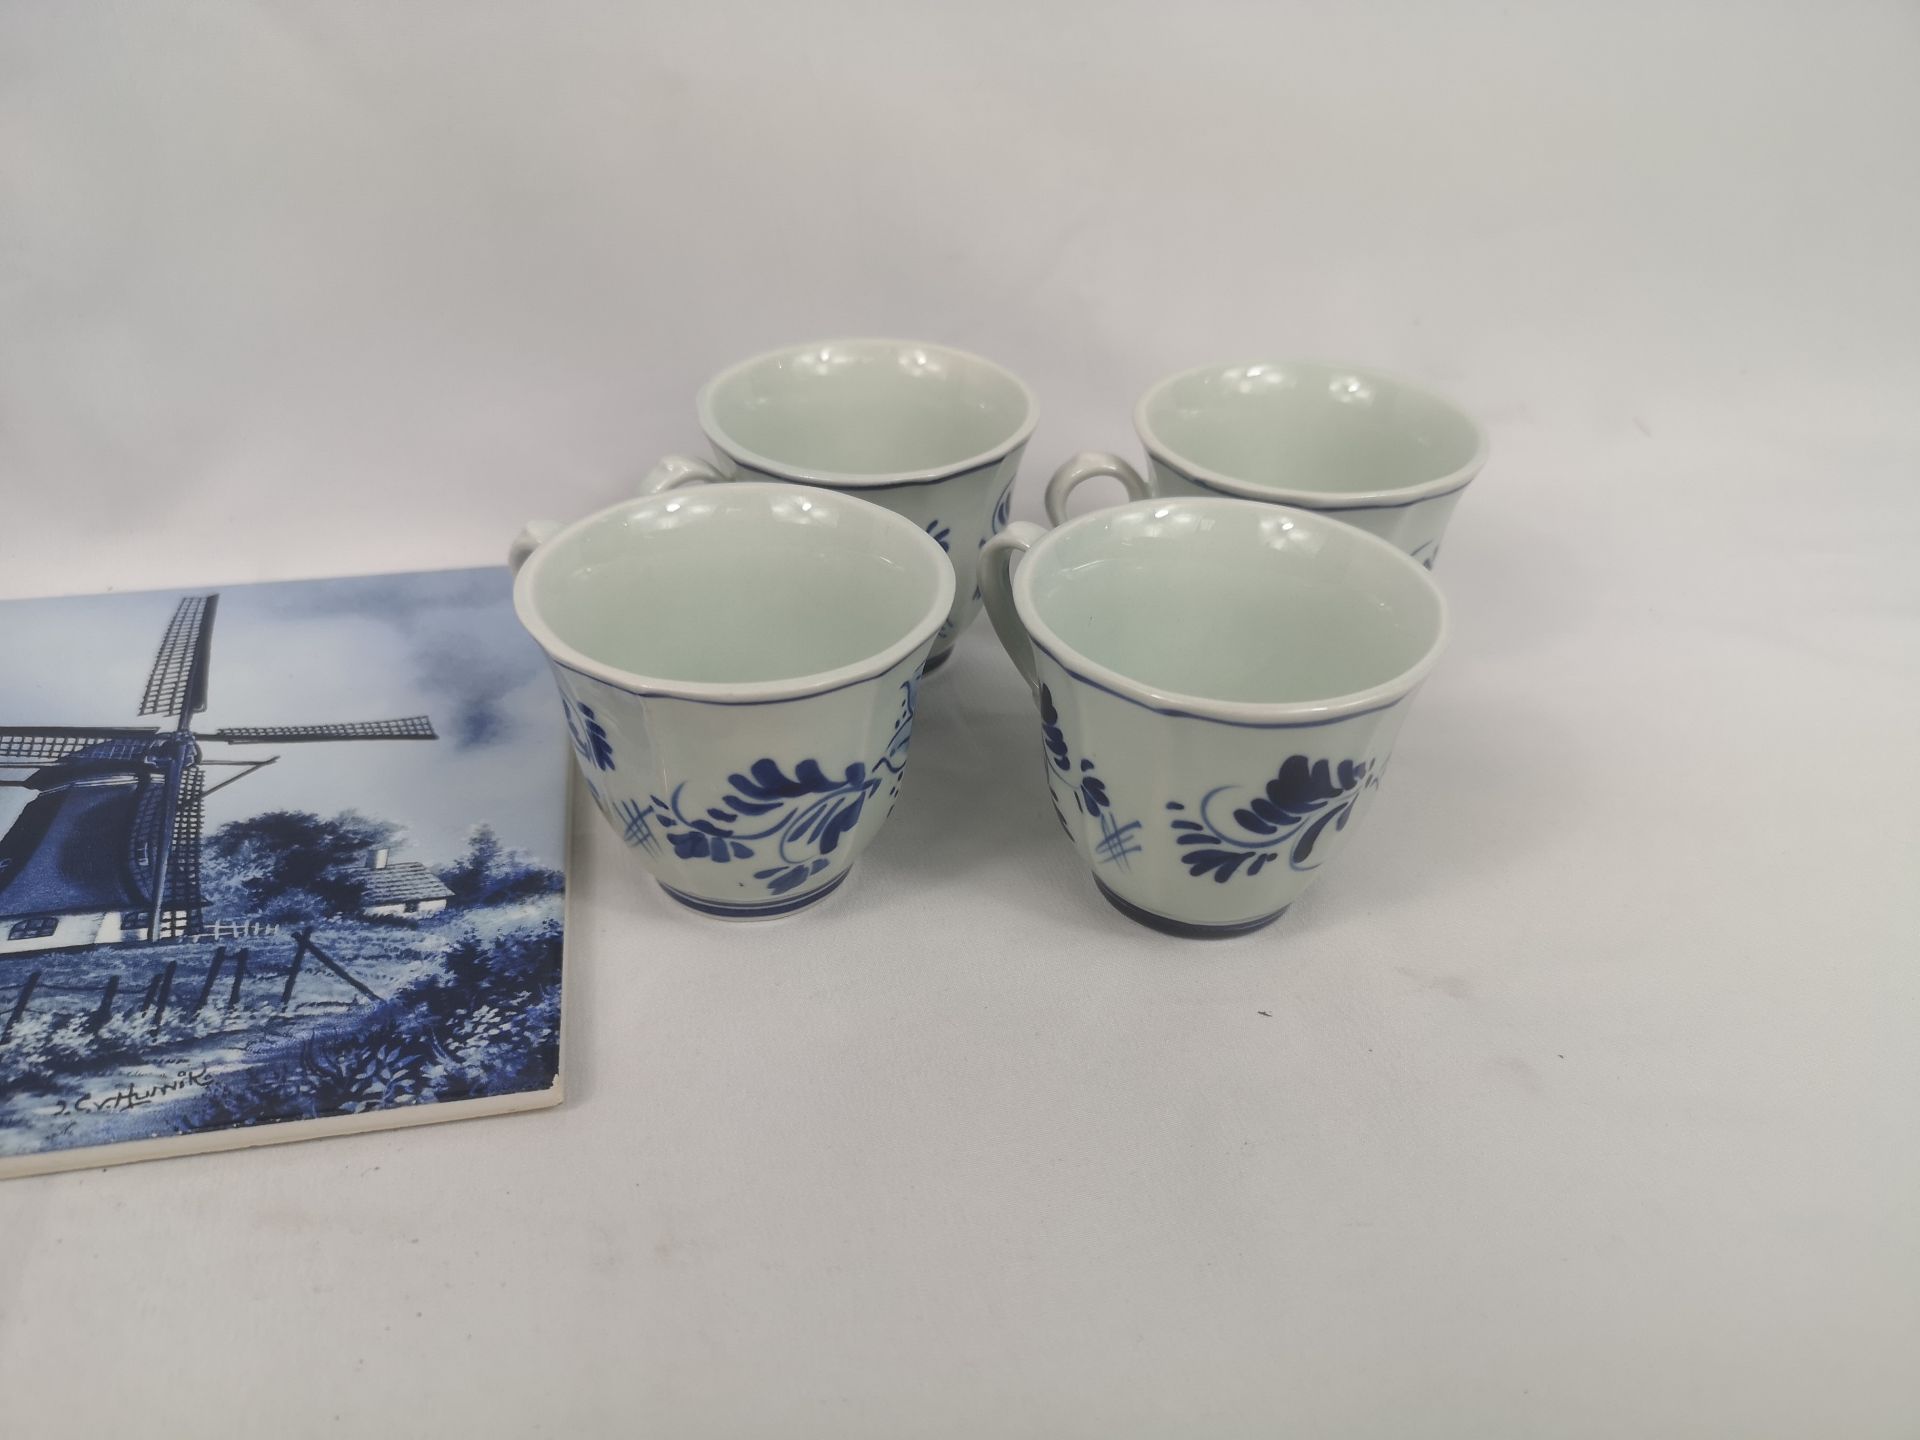 Four Delft cups and saucers together with a Delft tile - Image 2 of 4